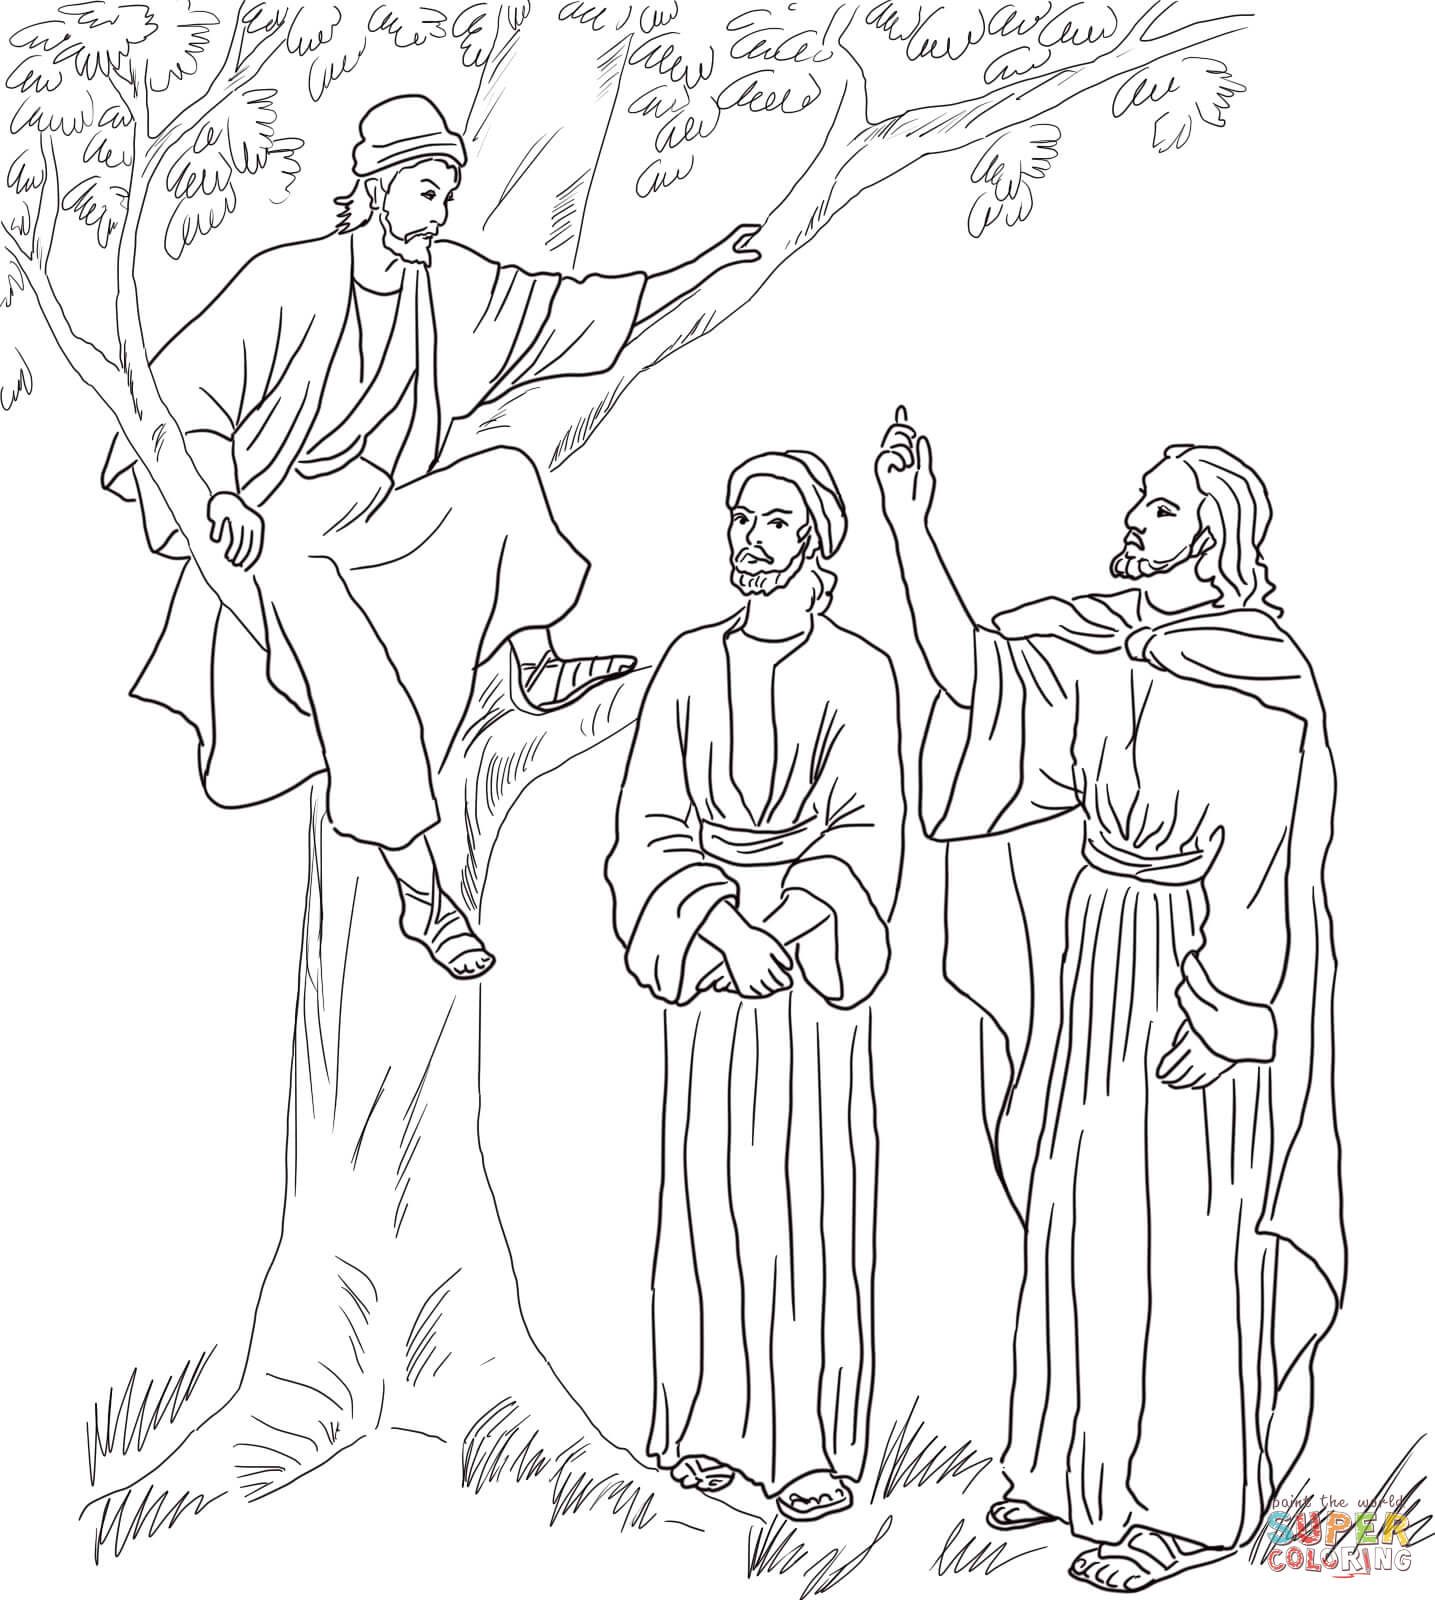 Zaccheus Coloring Pages - Coloring Home